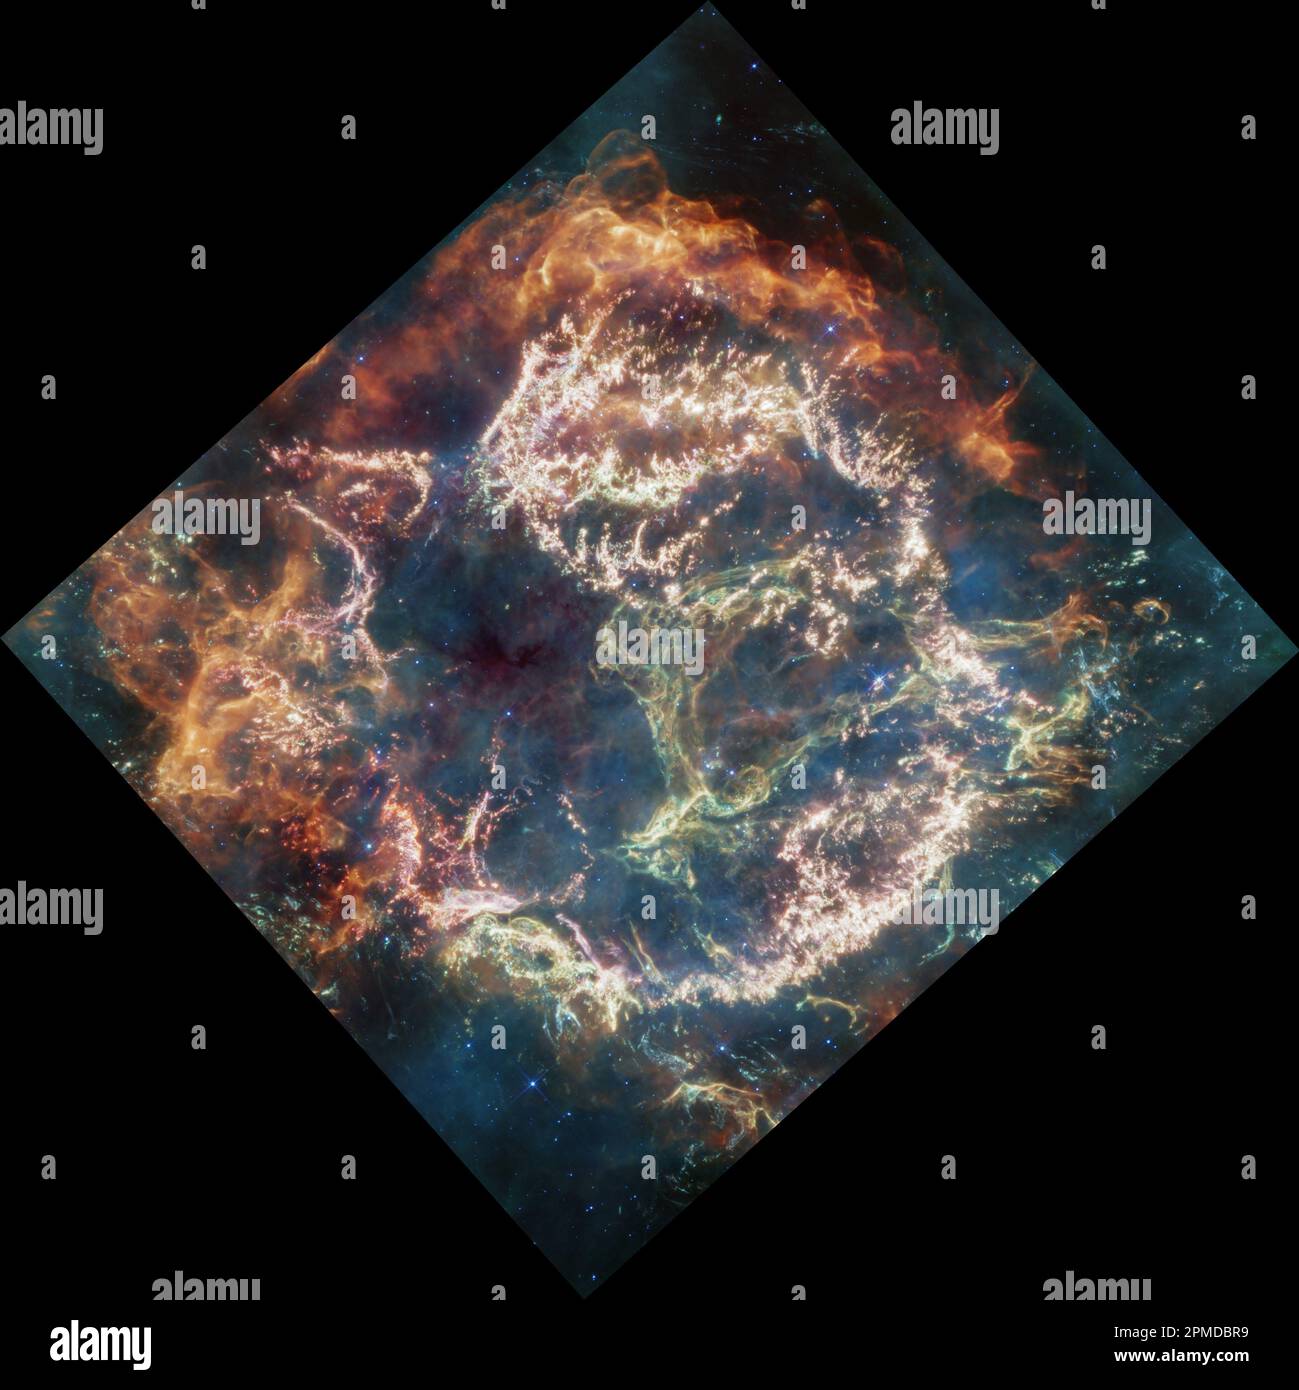 The explosion of a star is a dramatic event, but the remains that the star leaves behind can be even more dramatic. A new mid-infrared image from NASA's James Webb Space Telescope provides one stunning example. It shows the supernova remnant Cassiopeia A (Cas A), created by a stellar explosion 340 years ago. The image displays vivid colors and intricate structures begging to be examined more closely. Cas A is the youngest known remnant from an exploding, massive star in our galaxy, offering astronomers an opportunity to perform stellar forensics to understand the star's death.Cassiopeia A (Cas Stock Photo